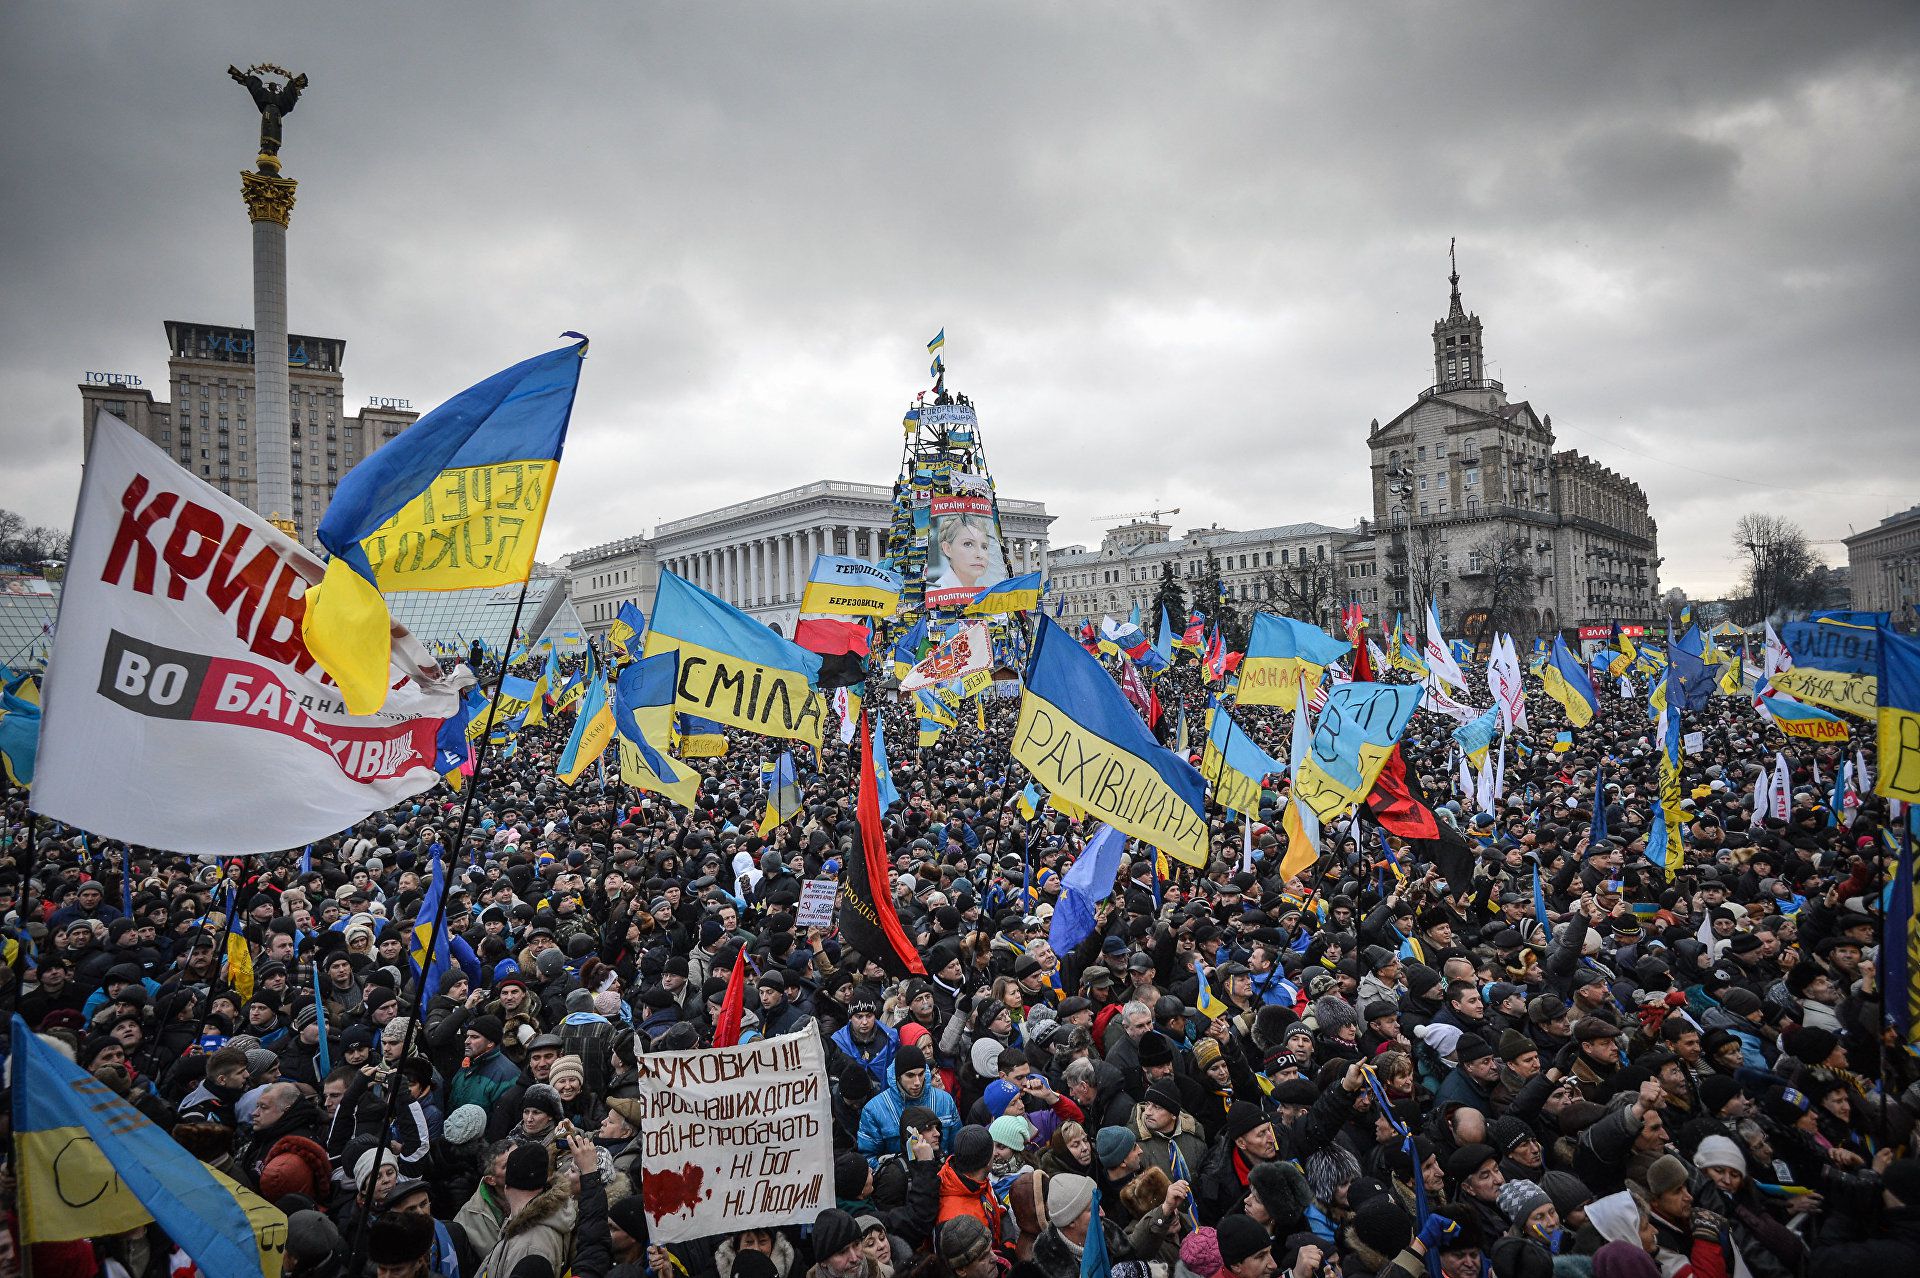 The Verkhovna Rada recognizes EuroMaidan as a historic event and calls to investigate crimes against its participants